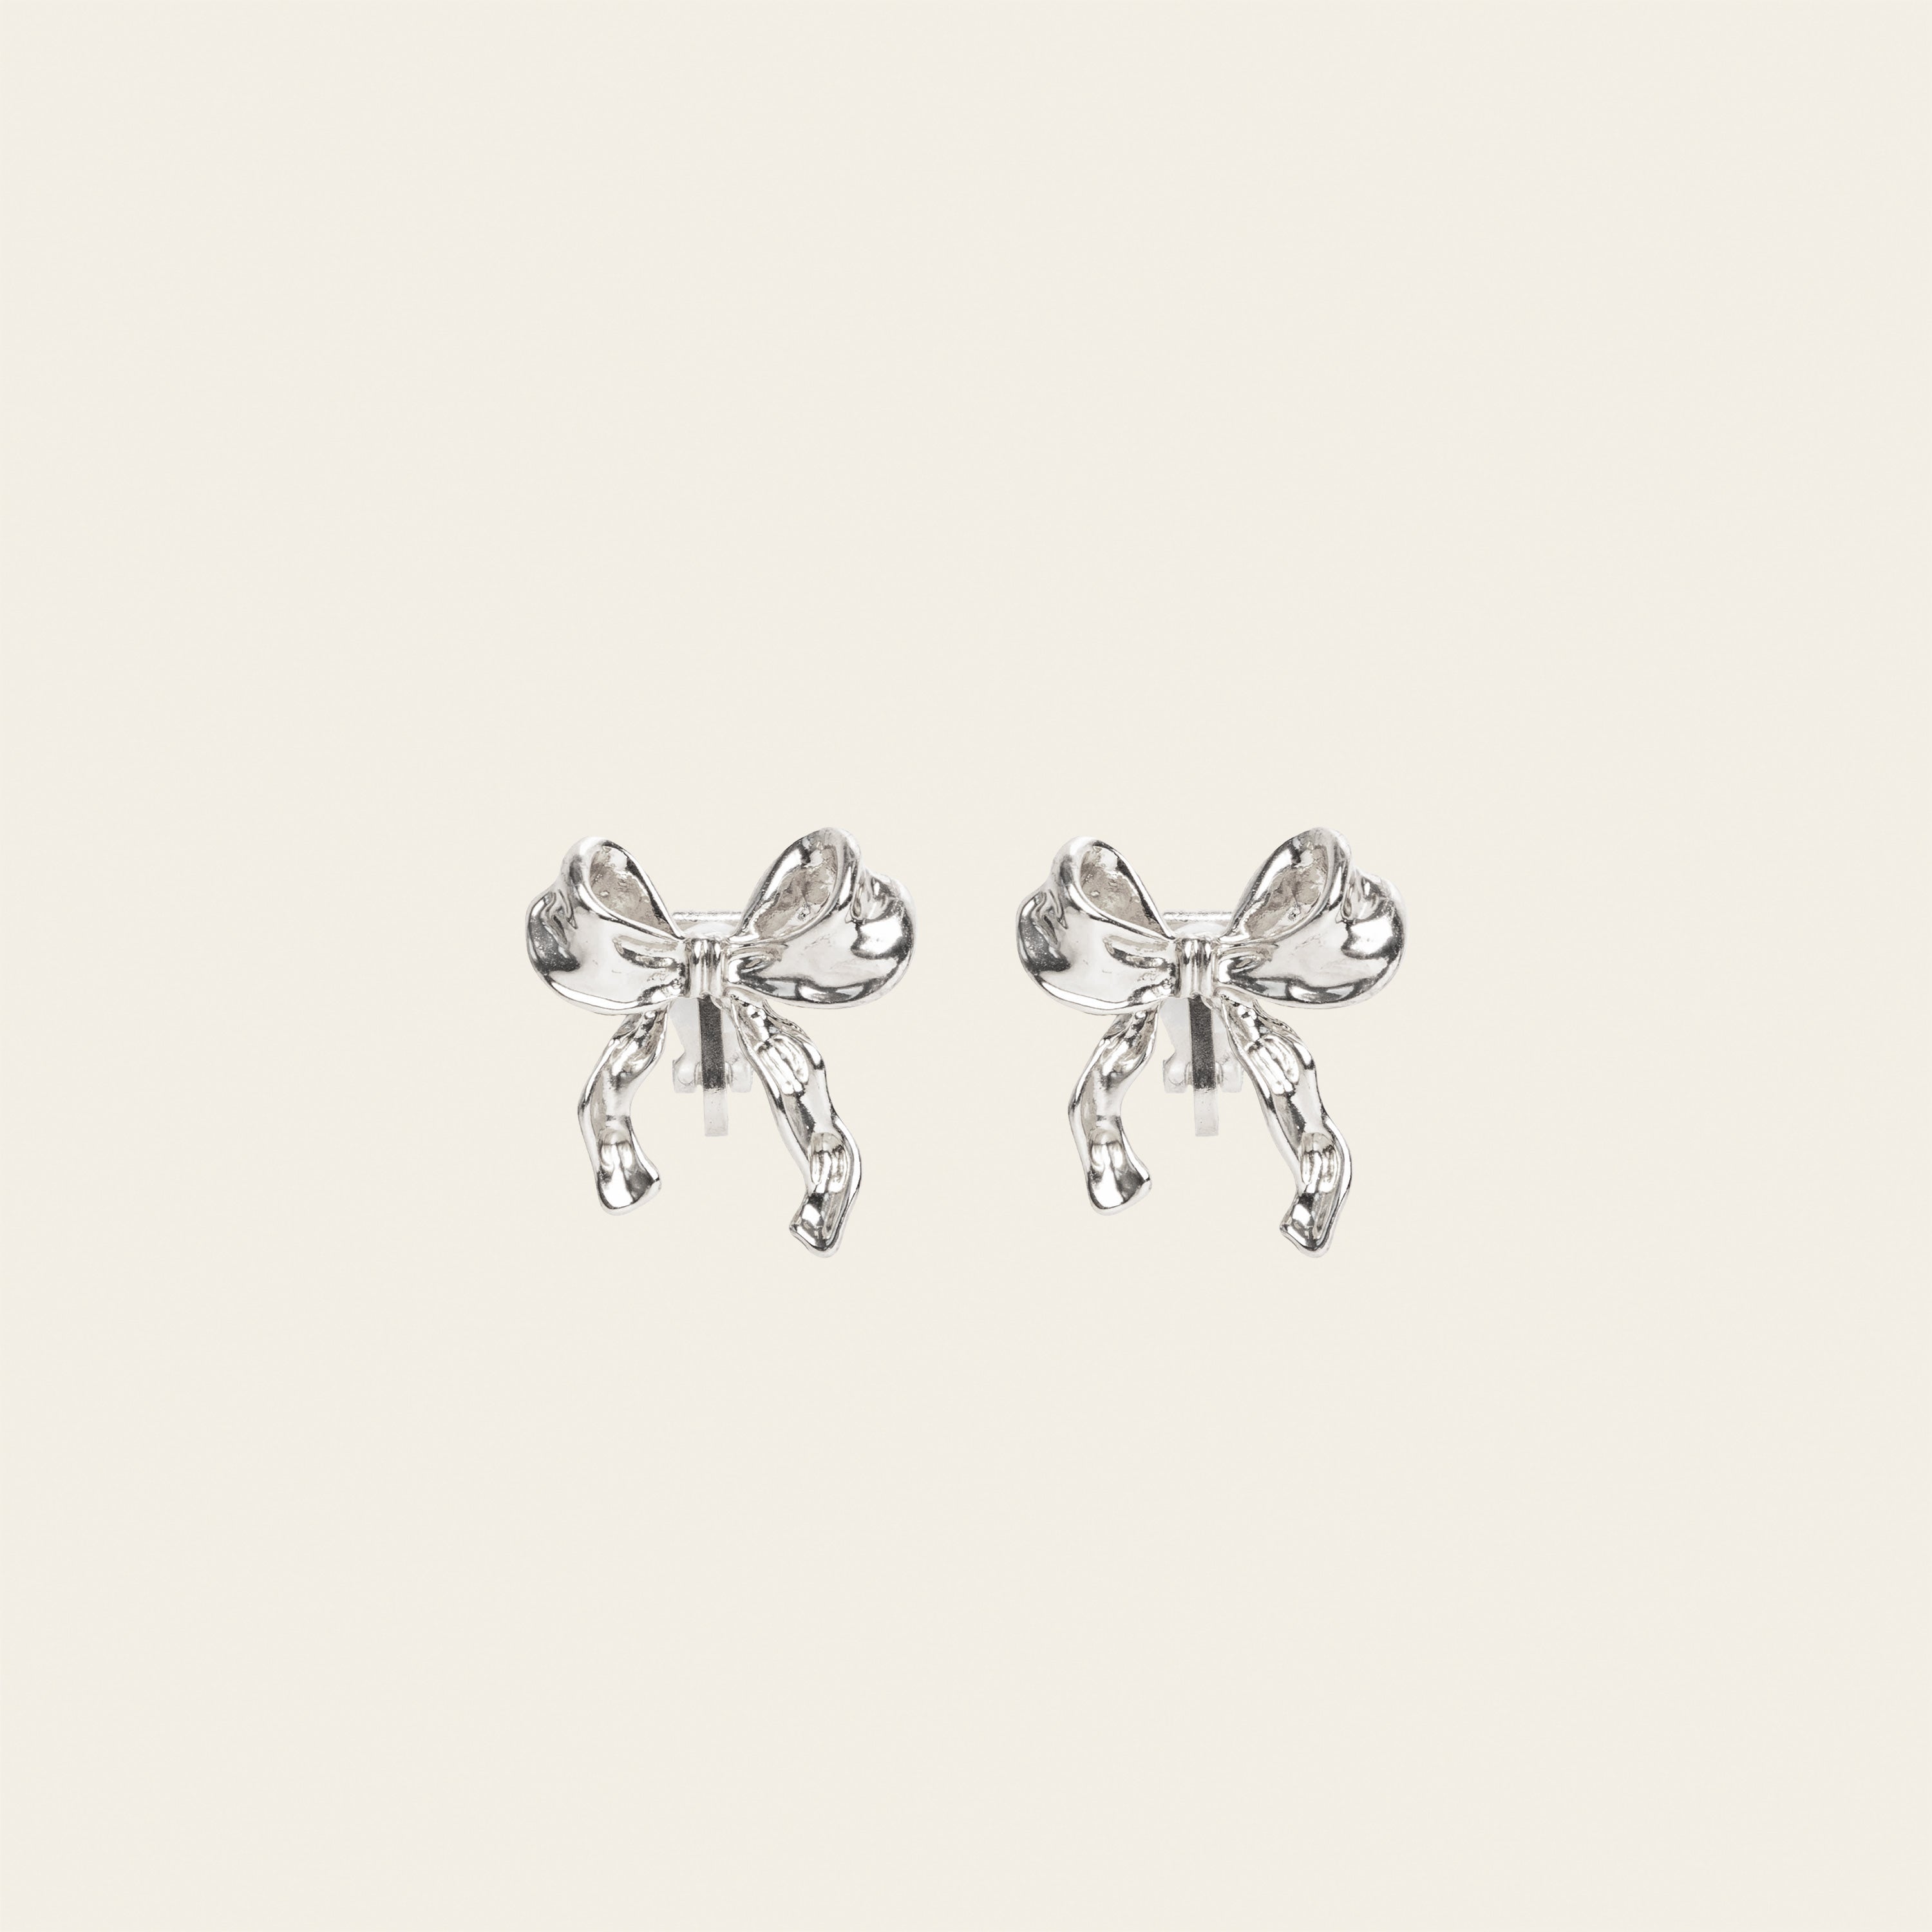 Image of the Charlie Clip On Earrings. Our expertly crafted earrings provide a 24-hour hold and adjustable fit for sensitive or stretched ears. Elevate your style with effortless elegance.